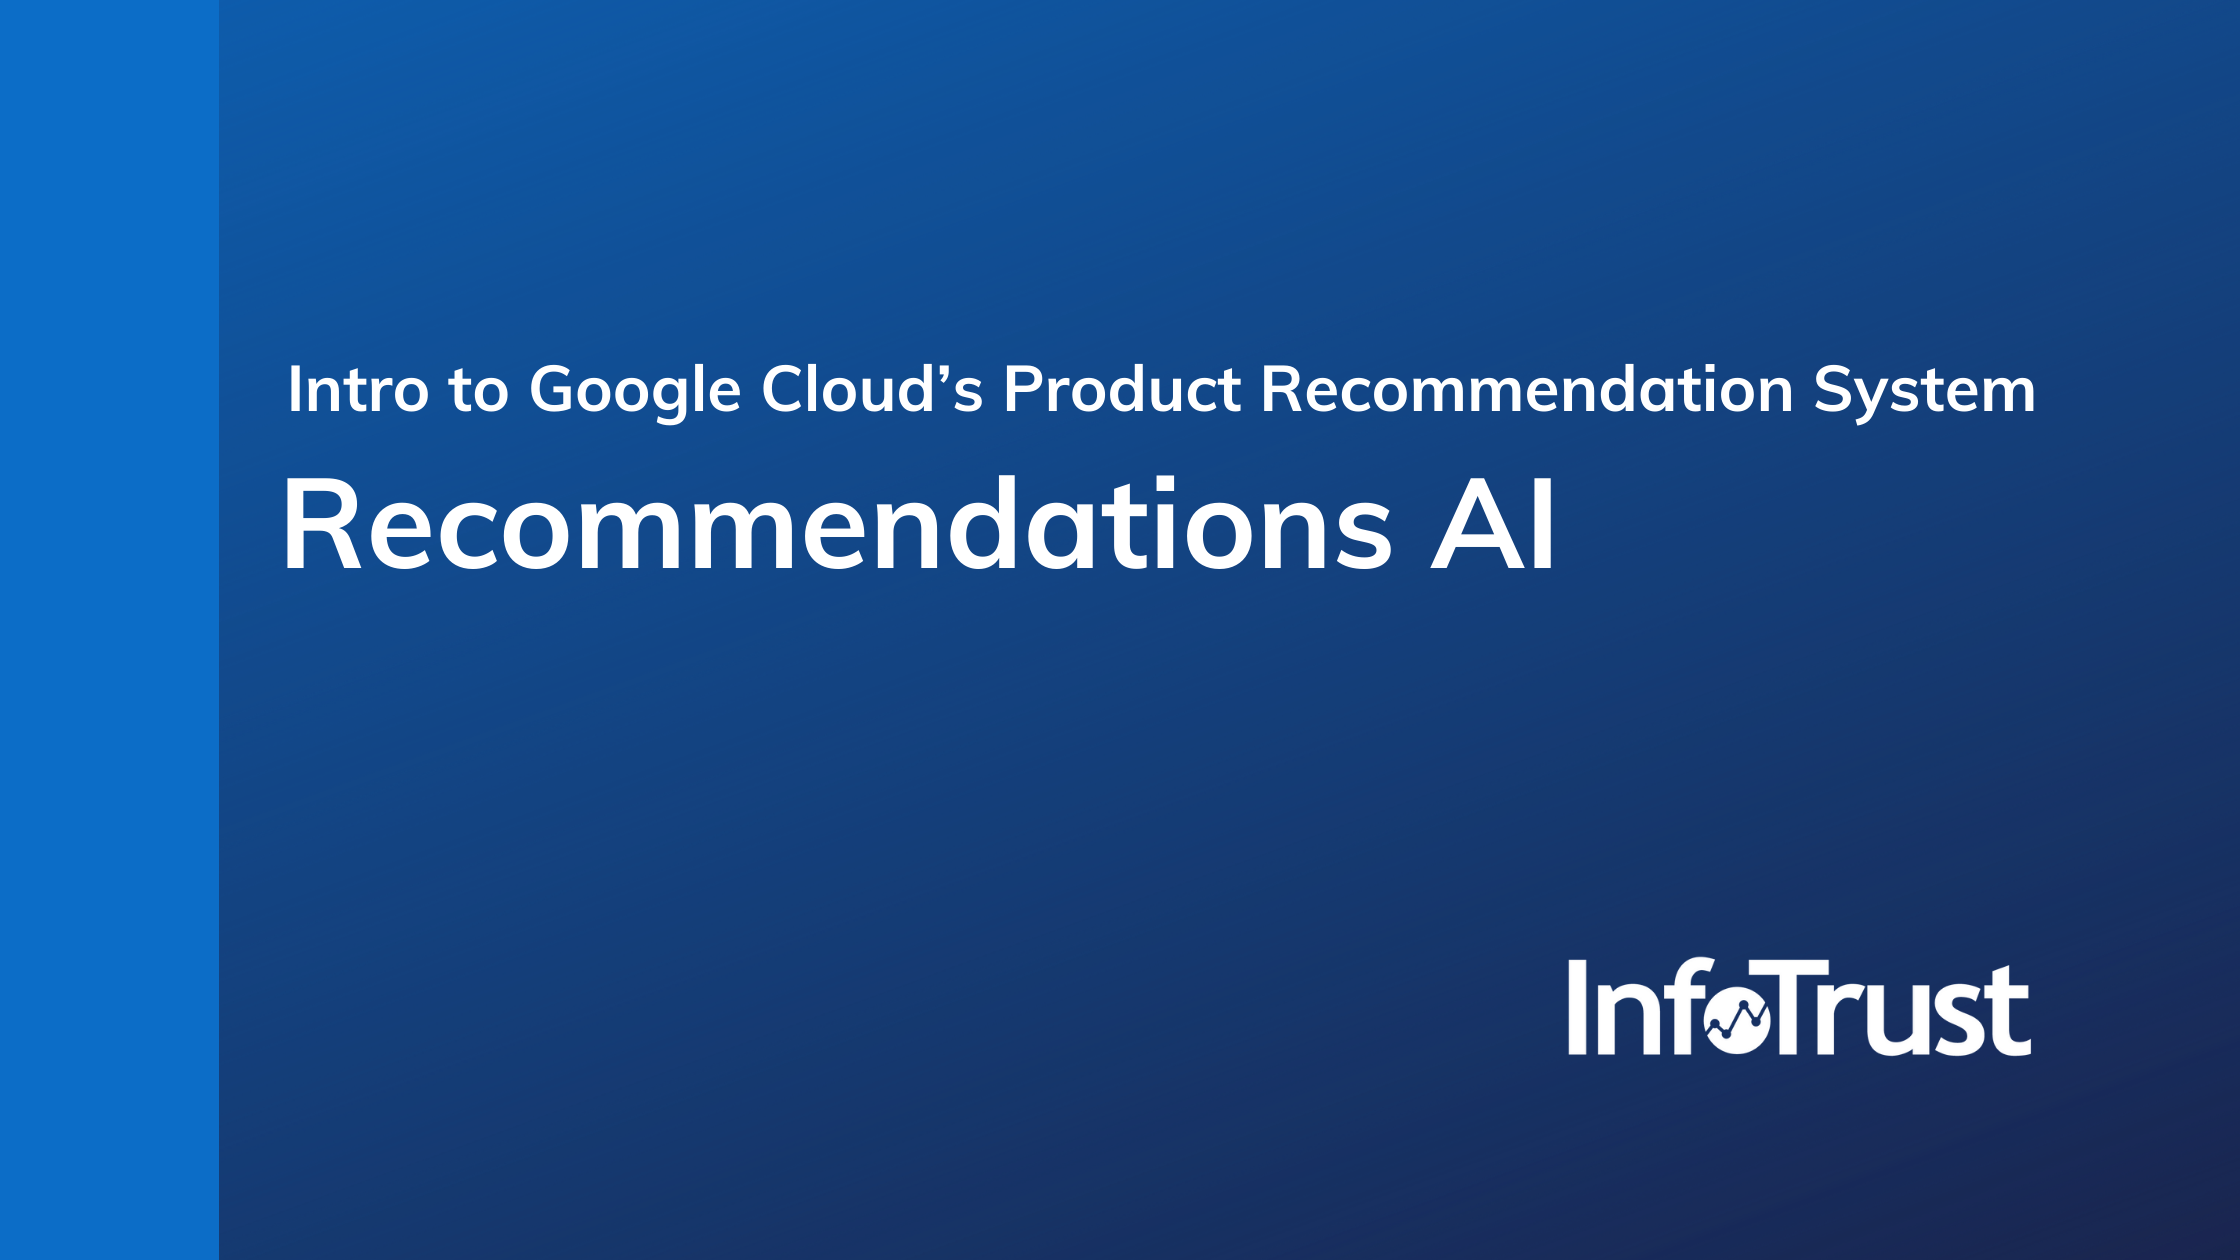 Intro to Google Cloud’s Product Recommendation System: Recommendations AI